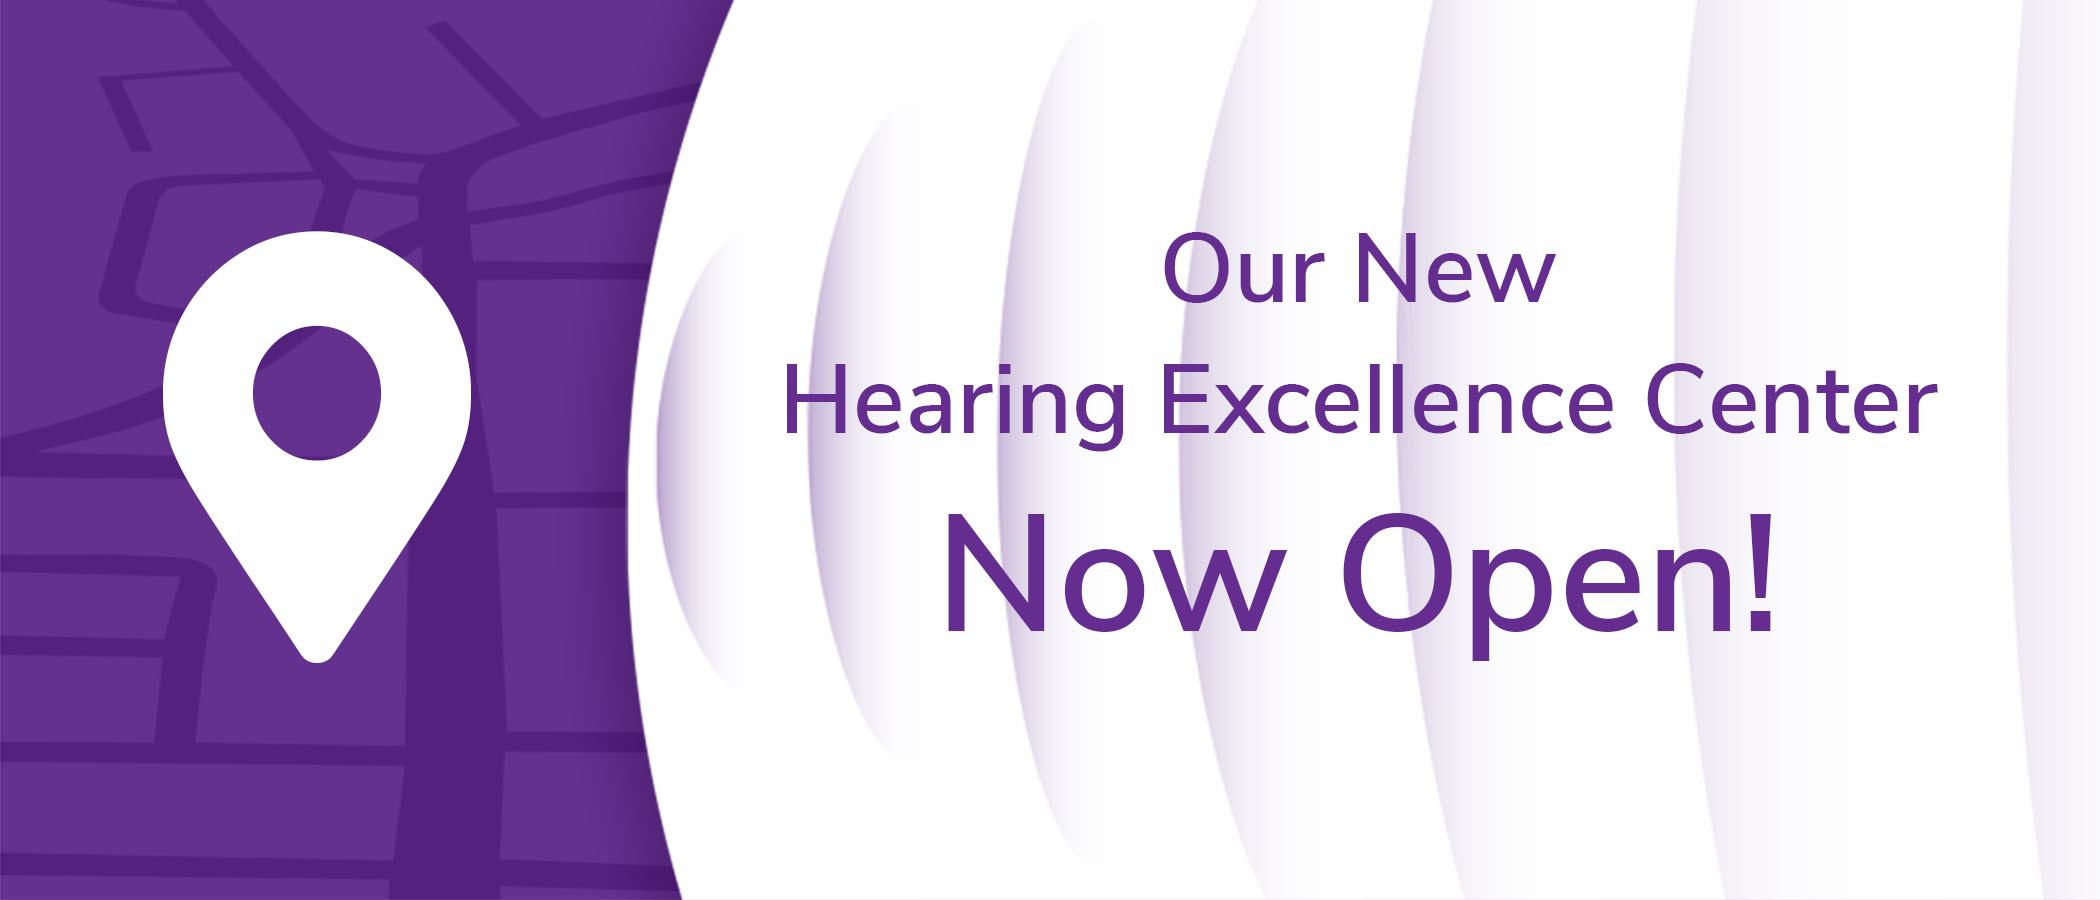 Our New Hearing Excellence Center Now Open!